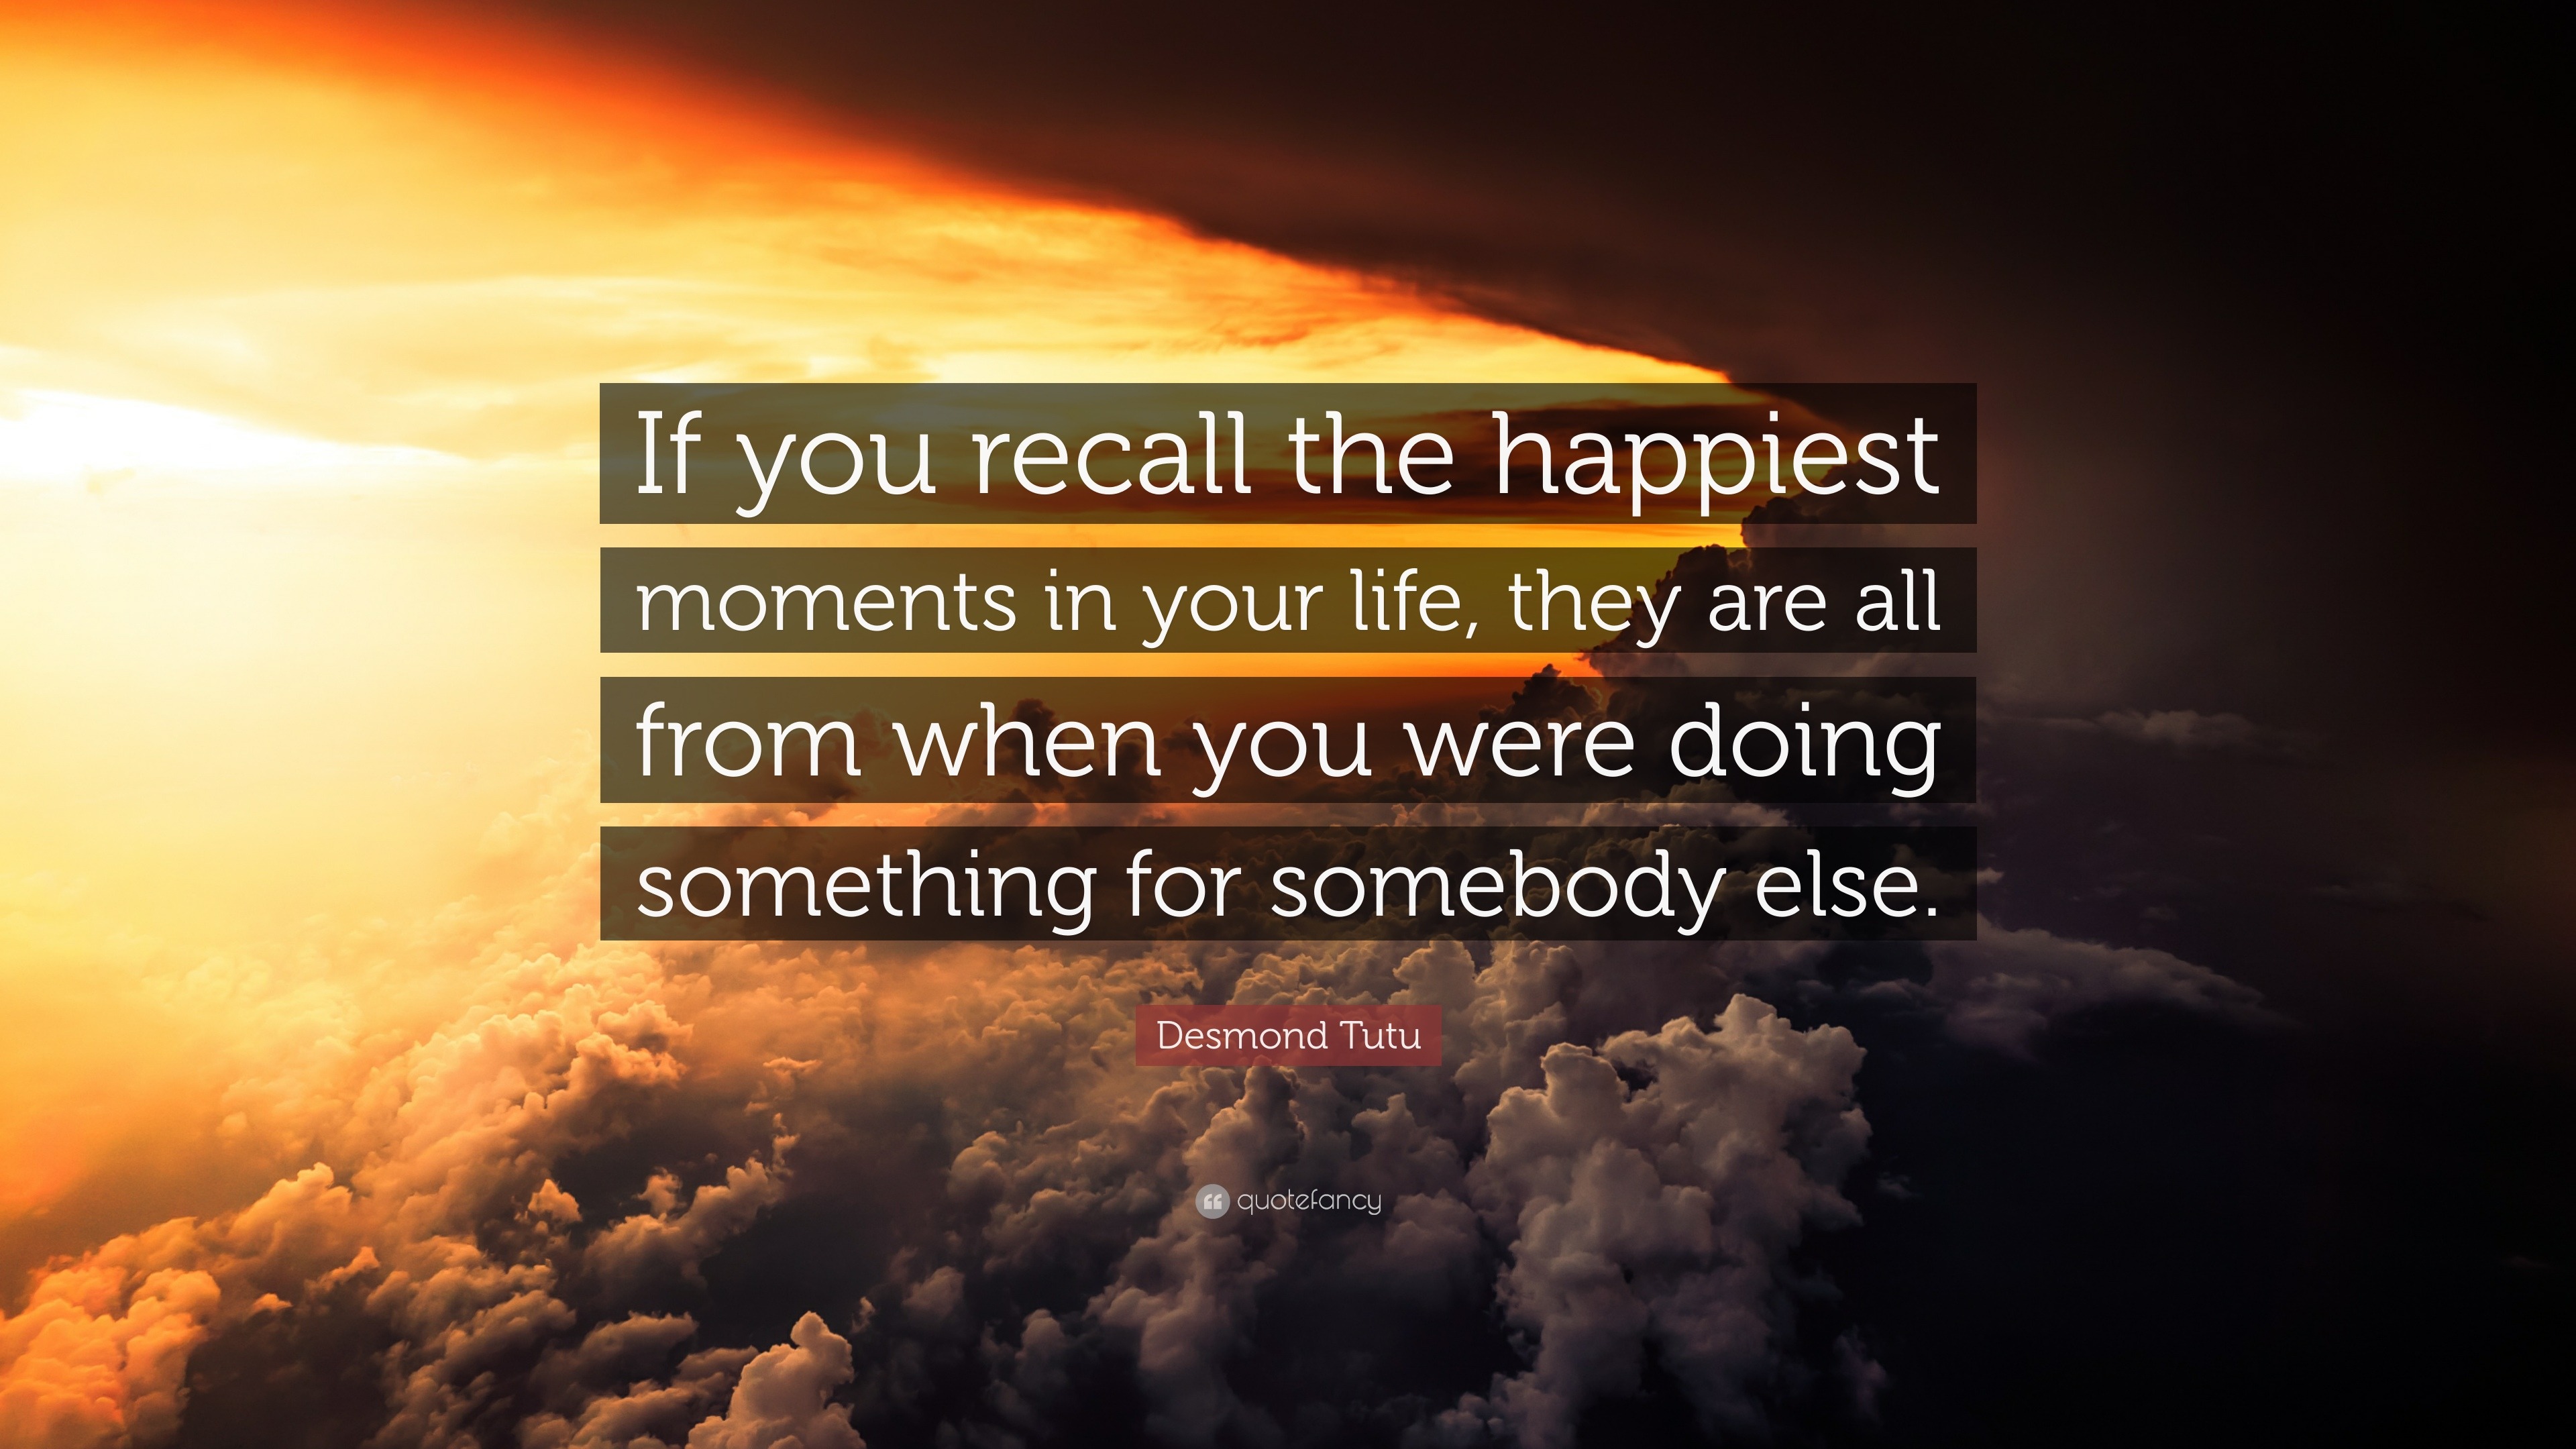 Desmond Tutu Quote: “If you recall the happiest moments in your life ...